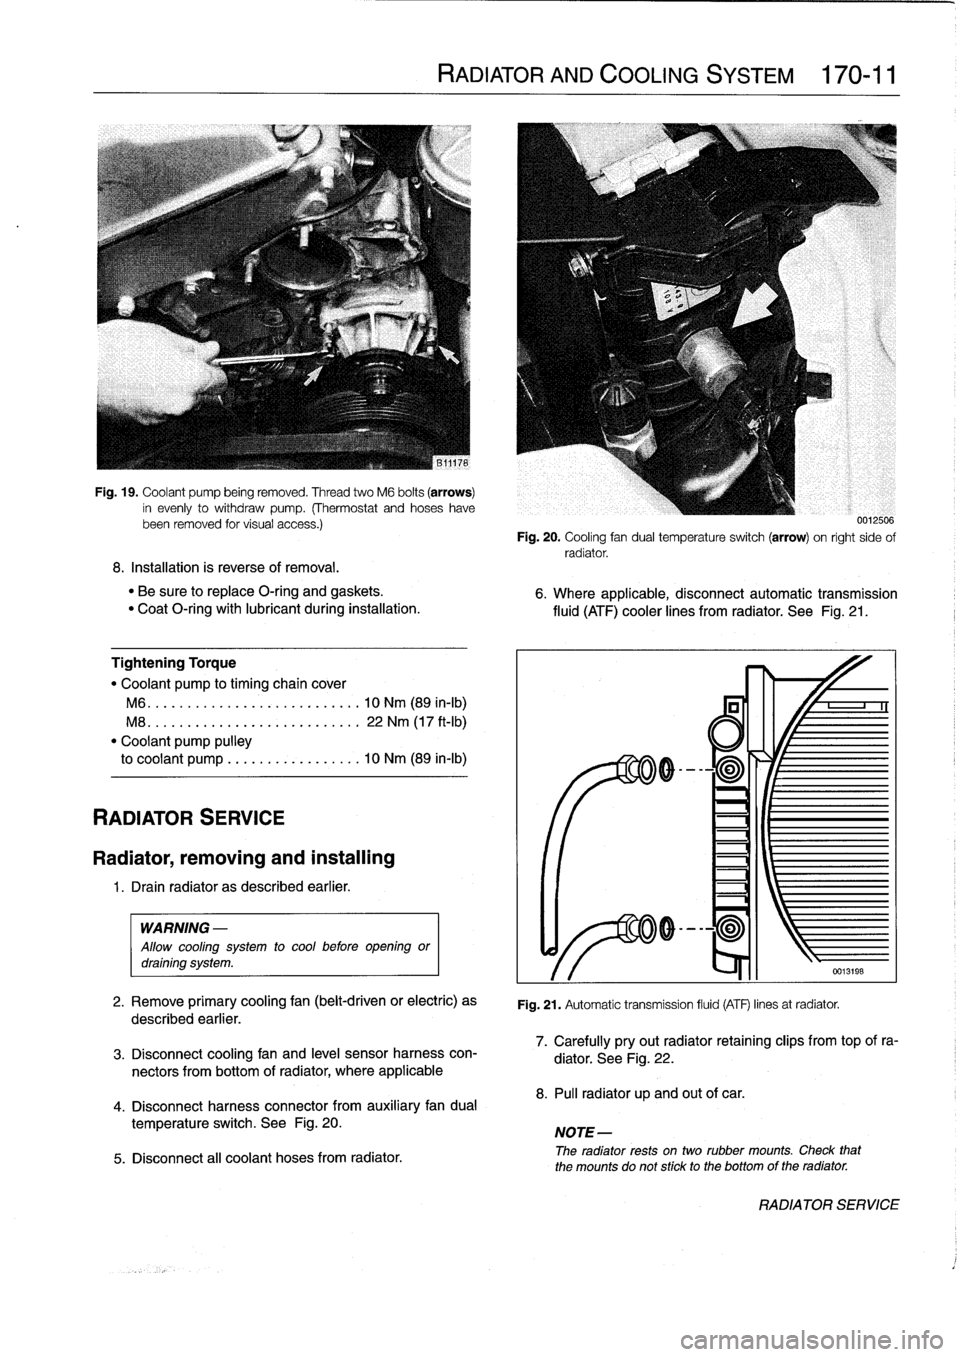 BMW 318i 1995 E36 Workshop Manual 
Fig
.
19
.
Coolant
pump
being
removed
.
Thread
two
M6
bolts
(arrows)
in
evenly
to
withdraw
pump
.
(Thermostat
and
hoseshavebeen
removed
tor
visual
access
.)

8
.
Installation
is
reverse
of
removal
.
